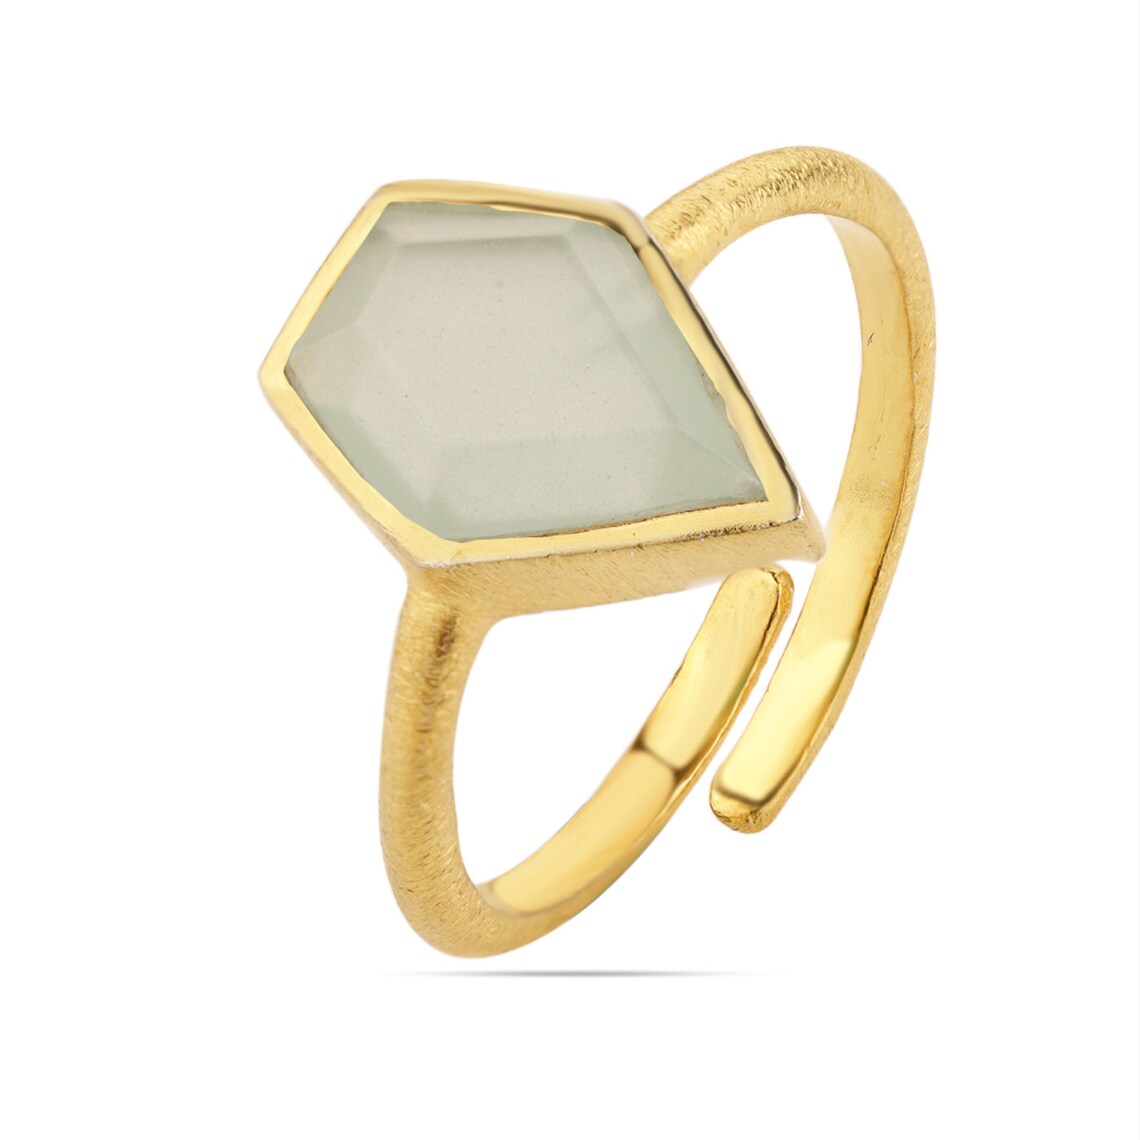 Aqua Onyx 925 Sterling Silver Ring -Gold Plated, Kite Shape, Stack Ring